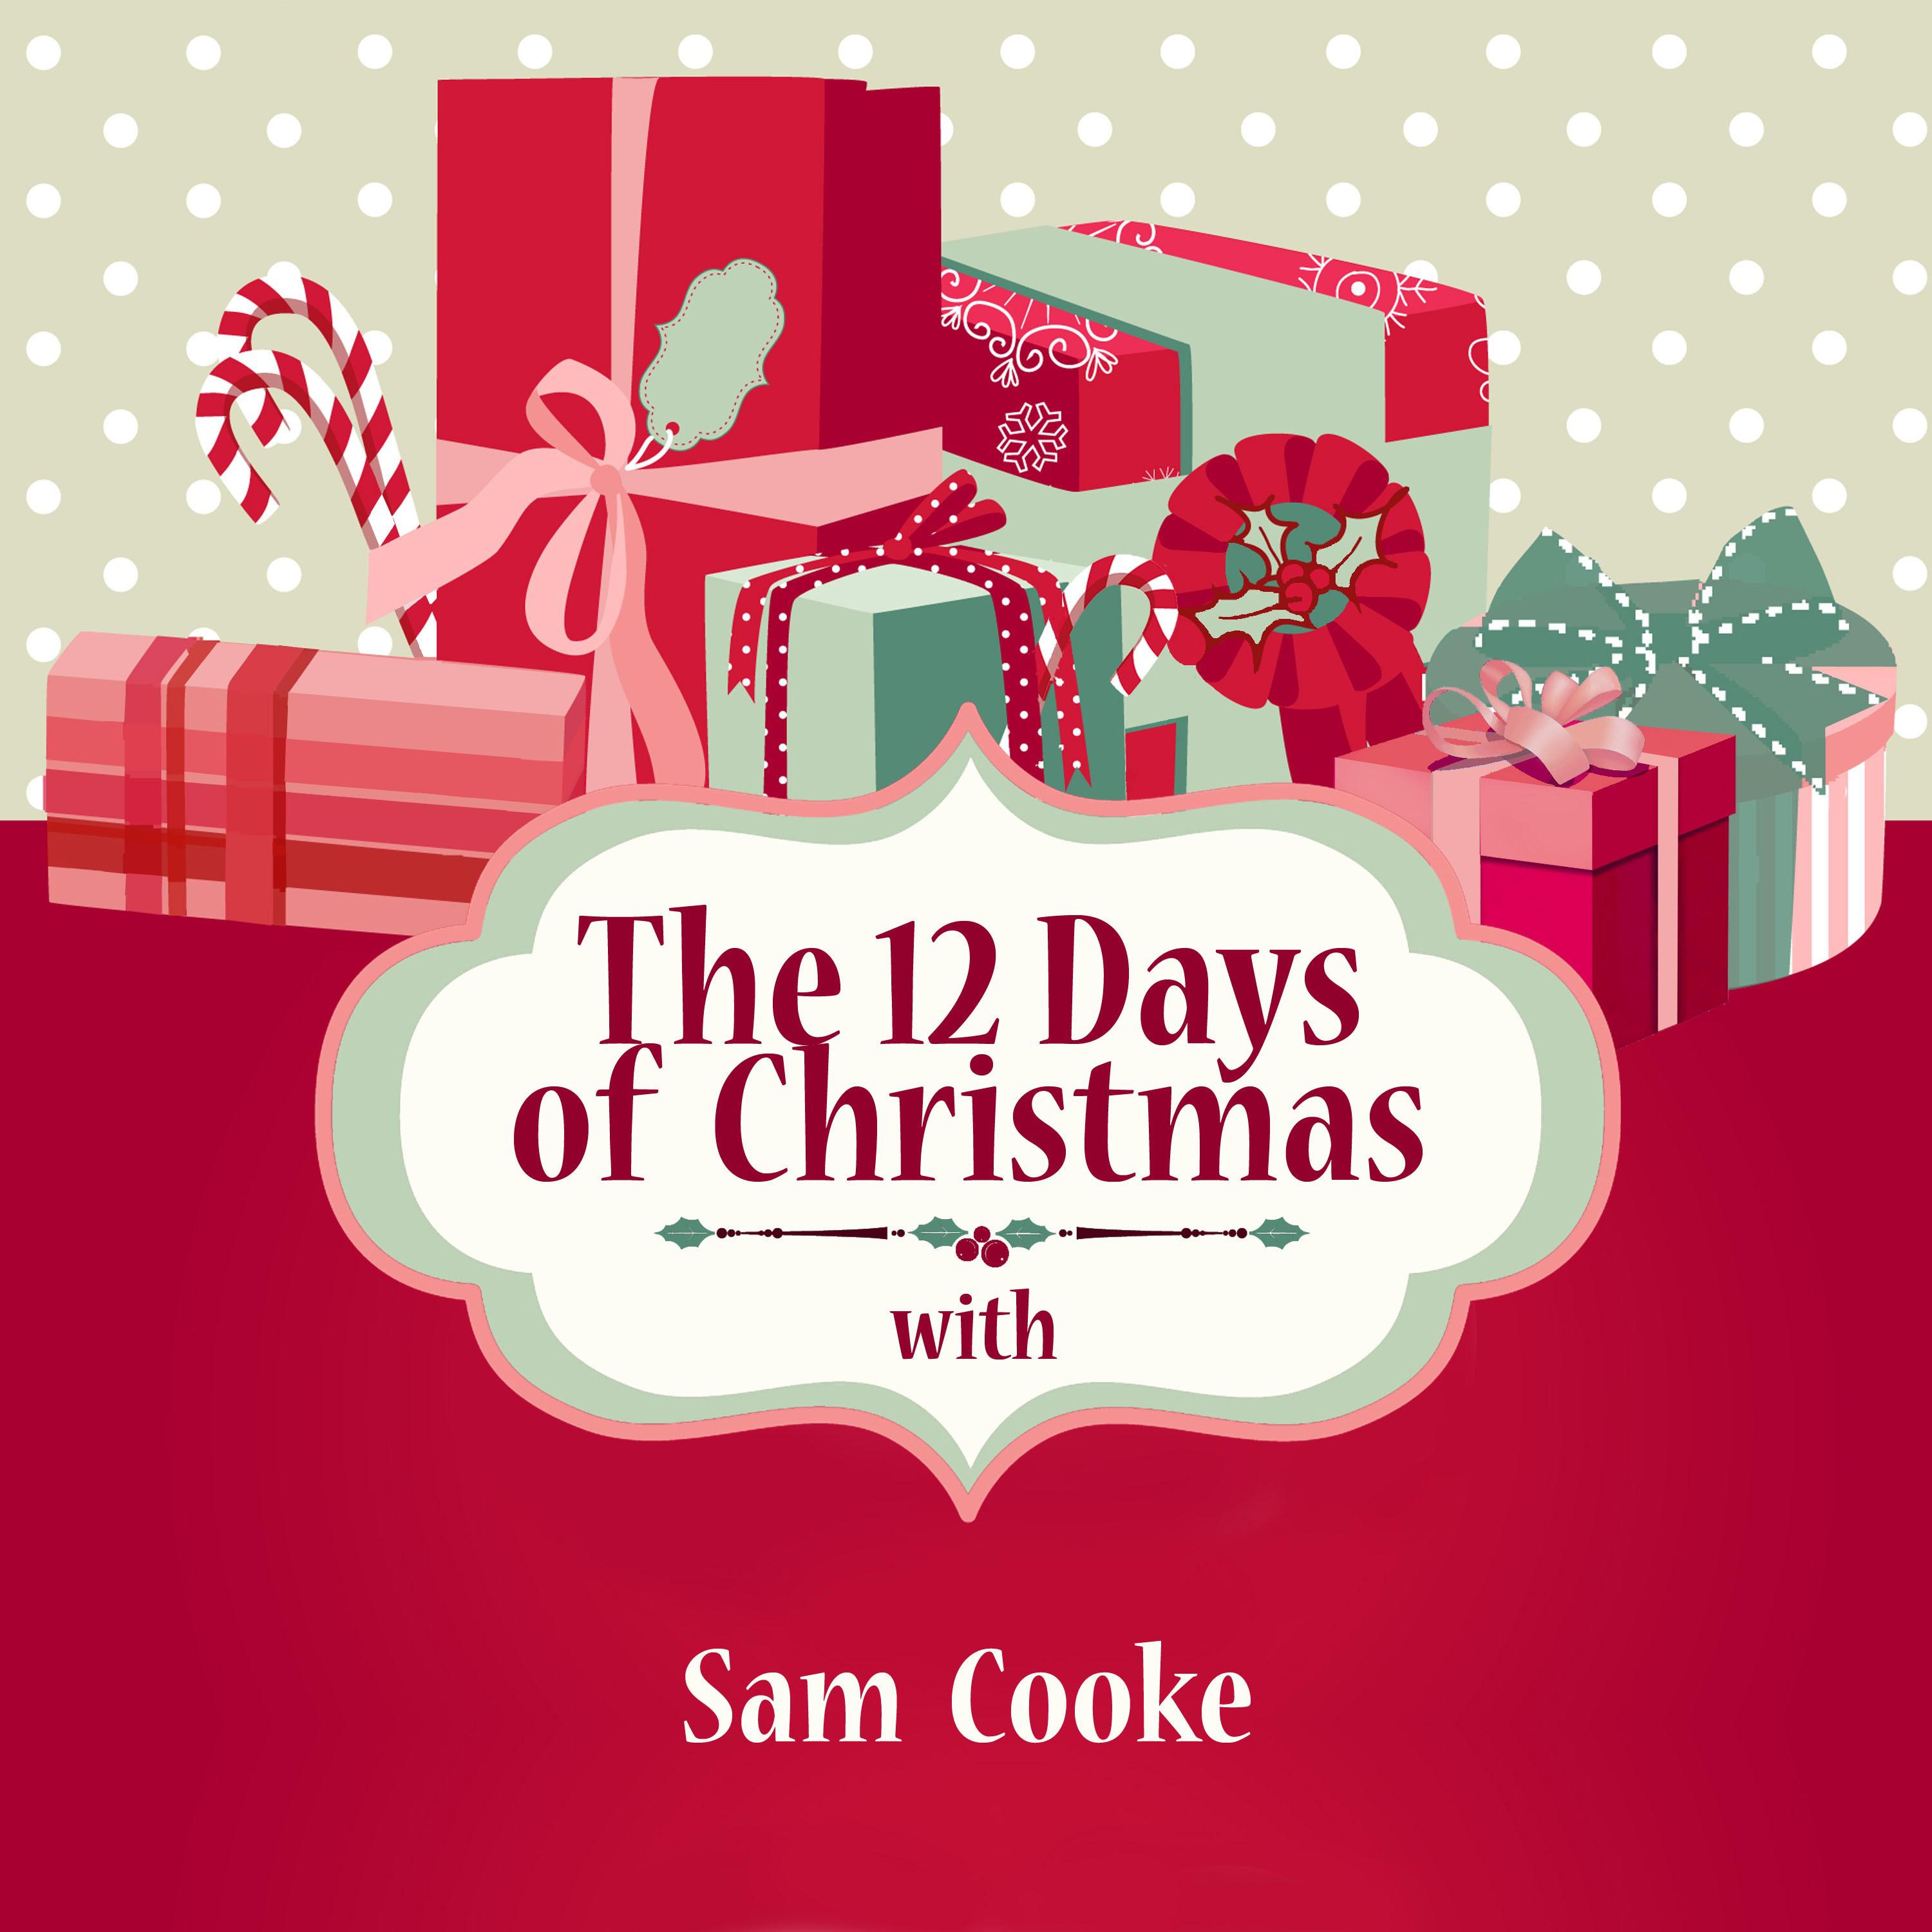 The 12 Days of Christmas with Sam Cooke